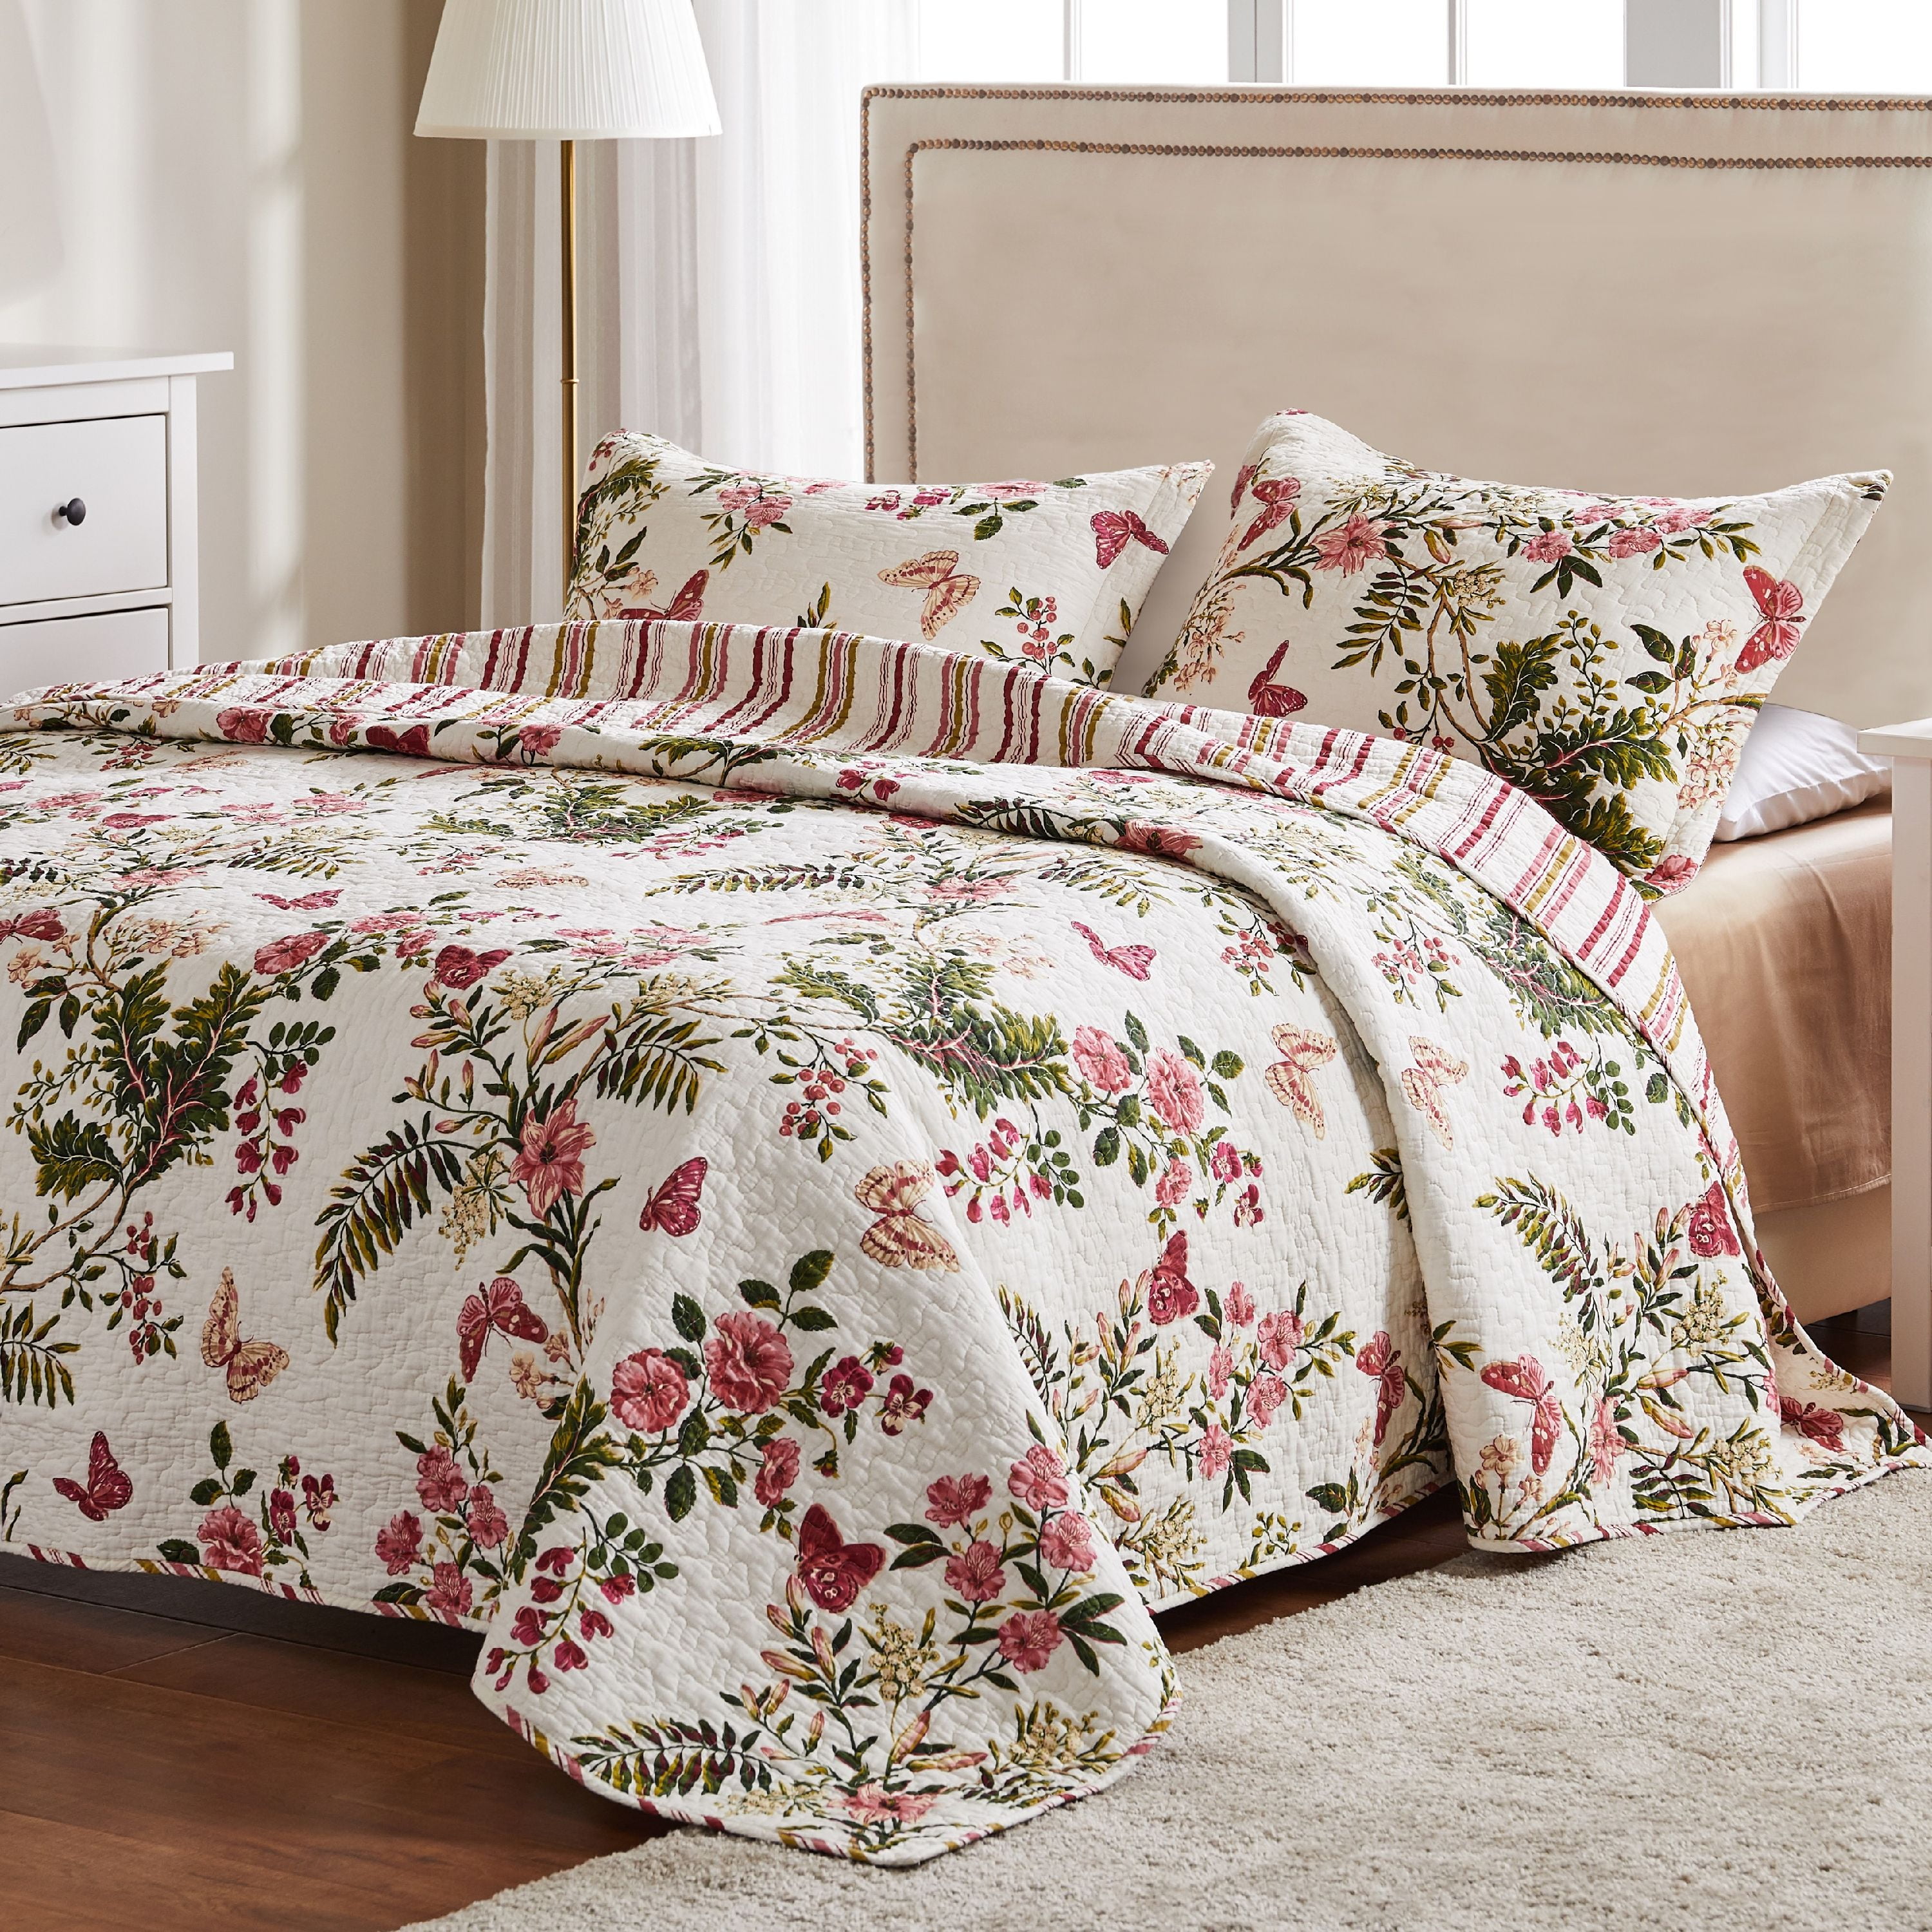 Details about   Elegant Brown Pink Floral Comforter Quilted Coverlet 10 pcs Cal King Queen Set 